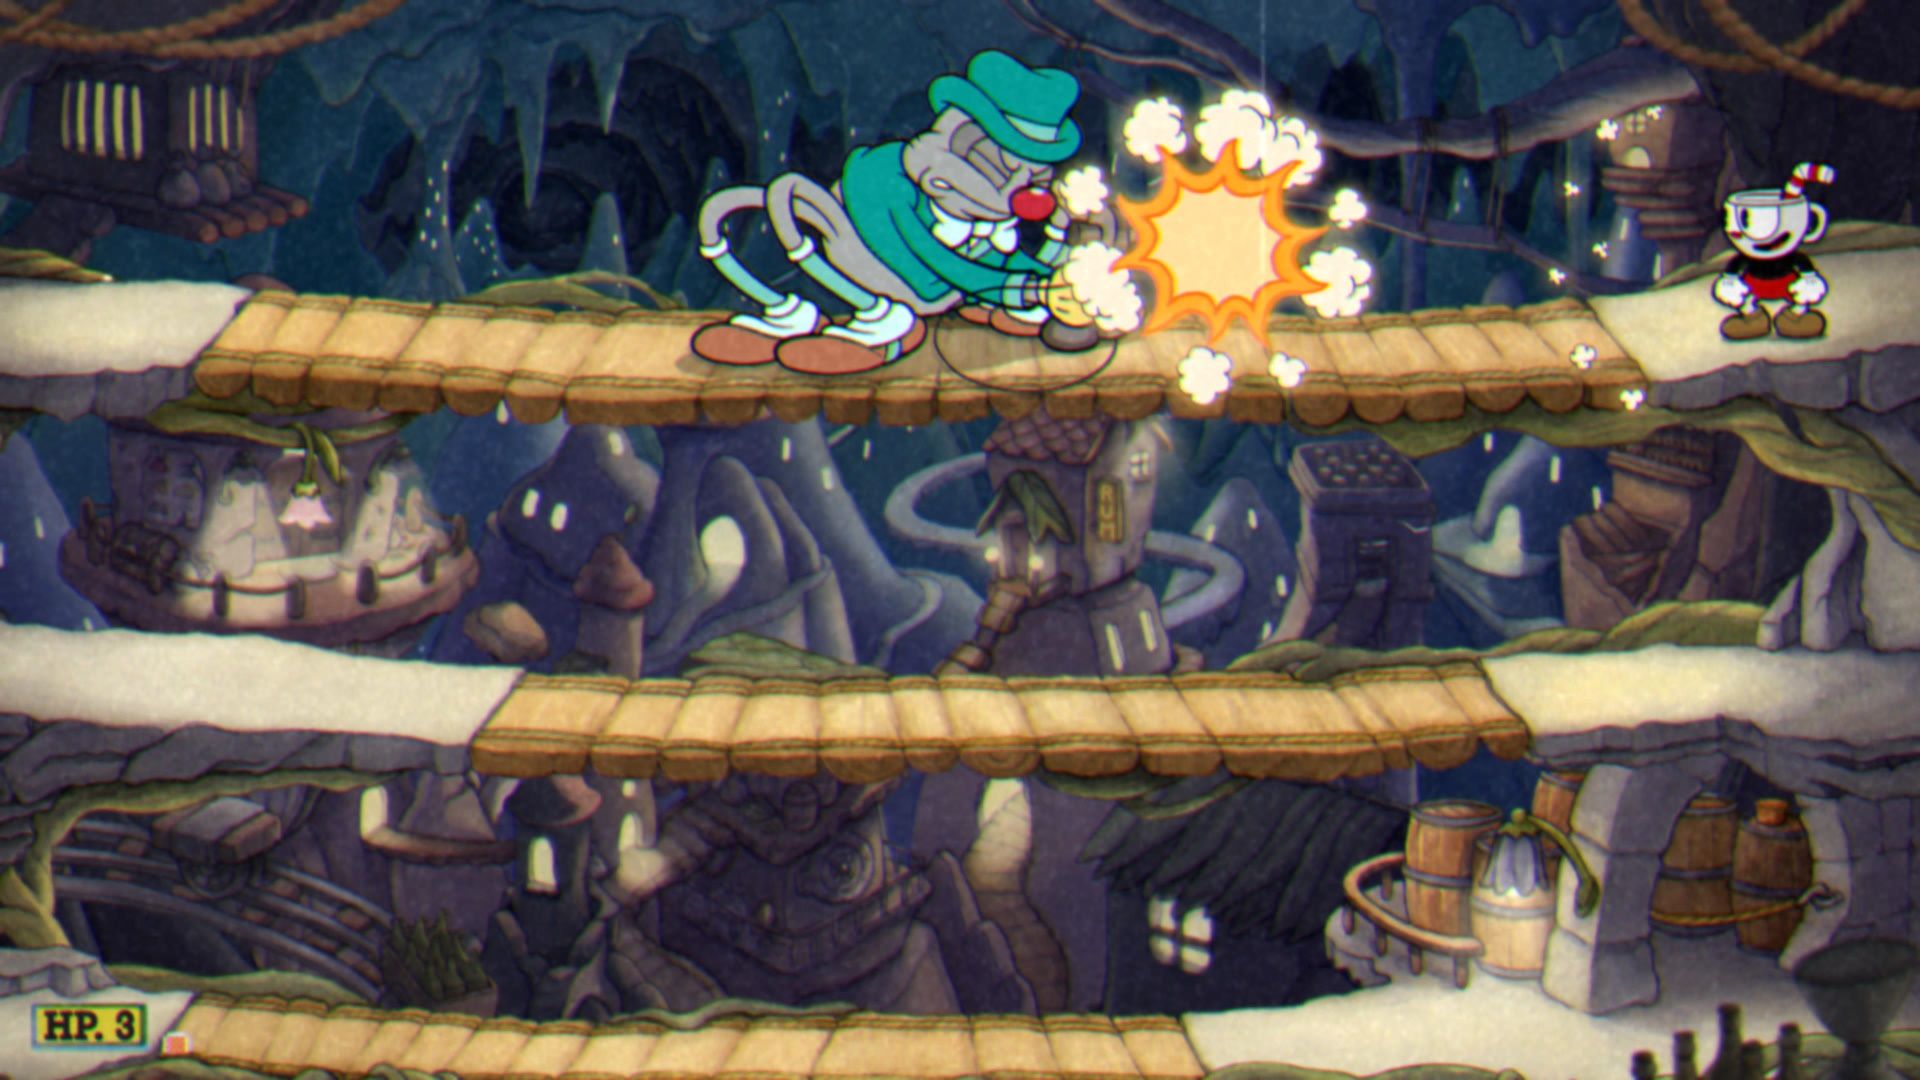 Cuphead The Delicious Course, The Moonshine Mob, Phase 1, Hitting the Spider Boss with a charged shot